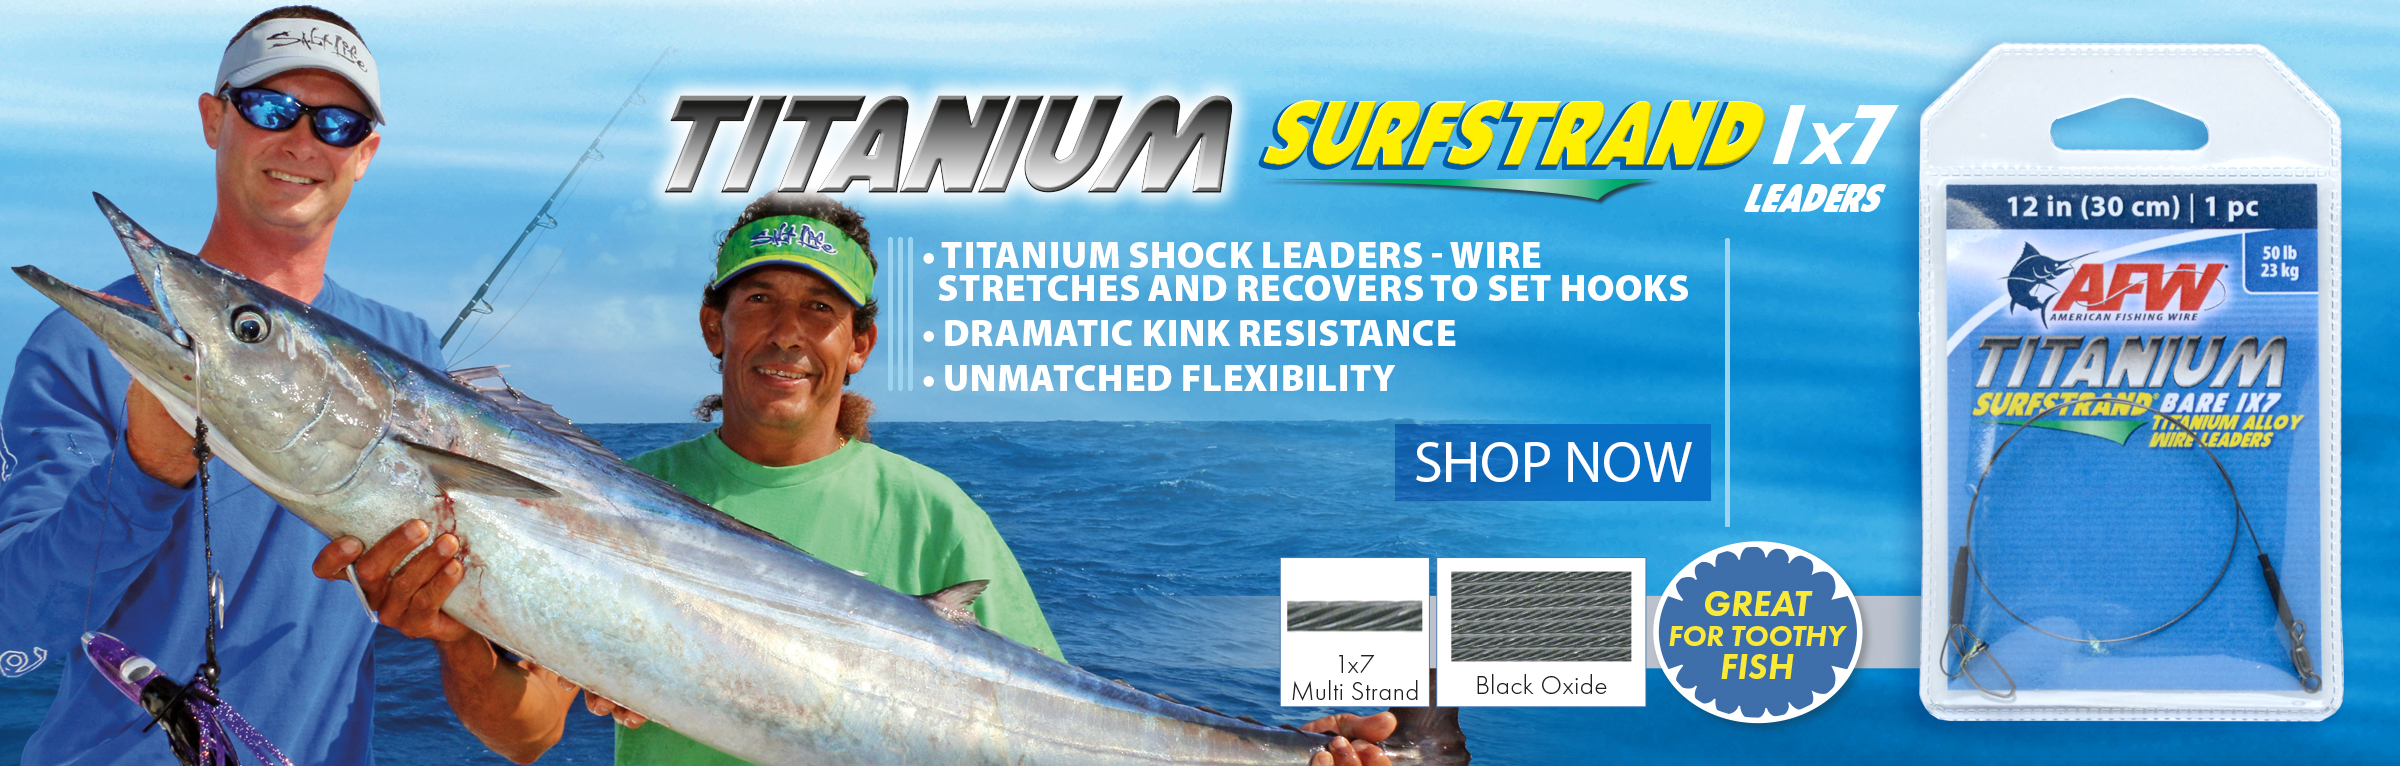 AFW Titanium Surfstrand, Bare 1x7 Fishing Leaders